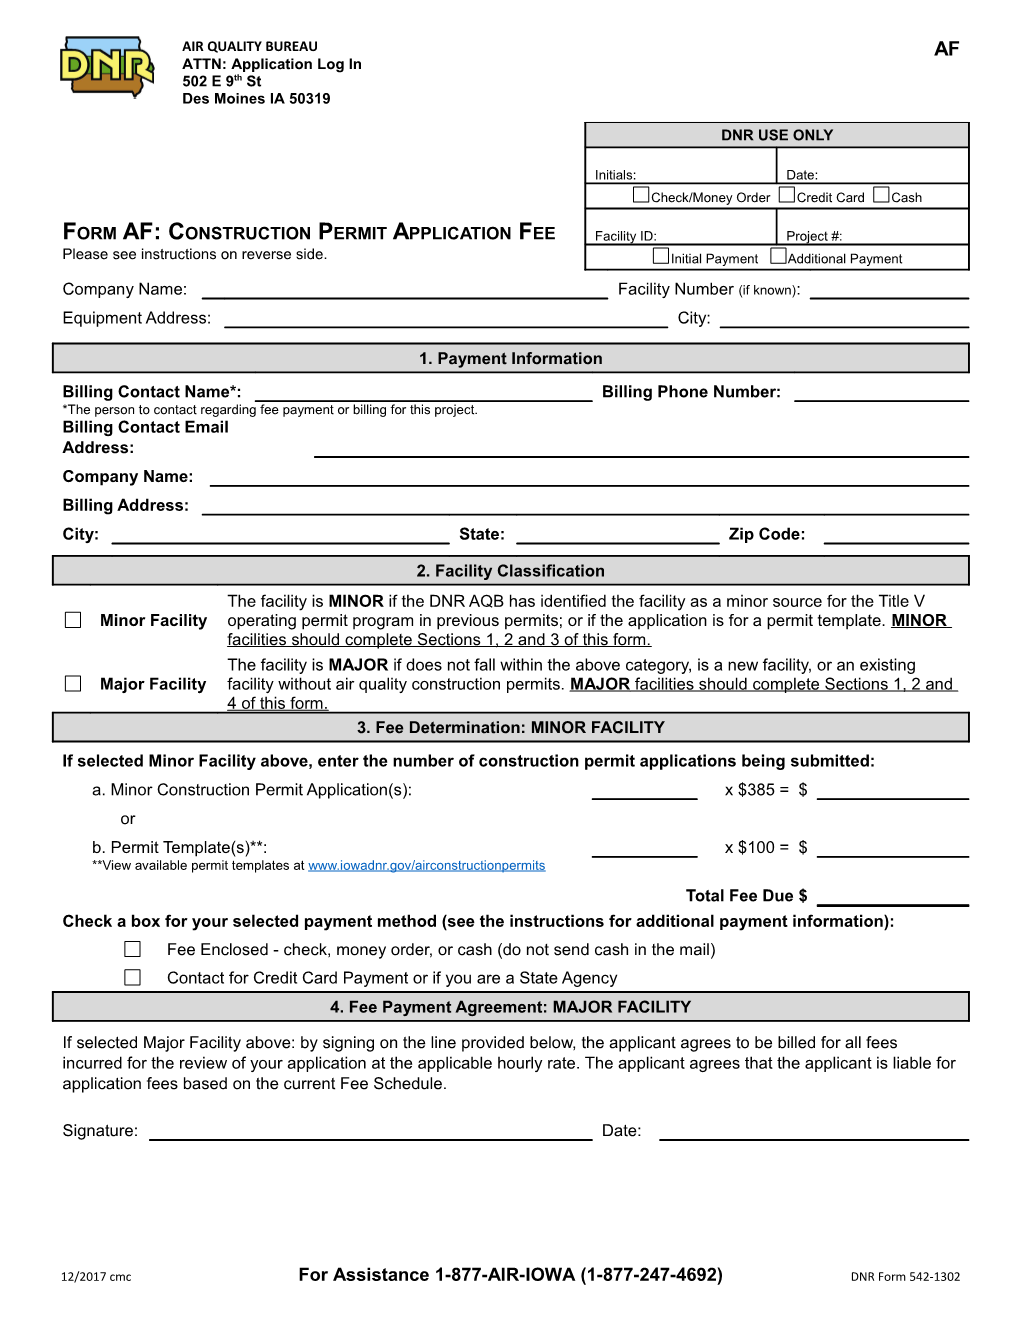 Instructions for Form AF: Construction Permit Application Fee